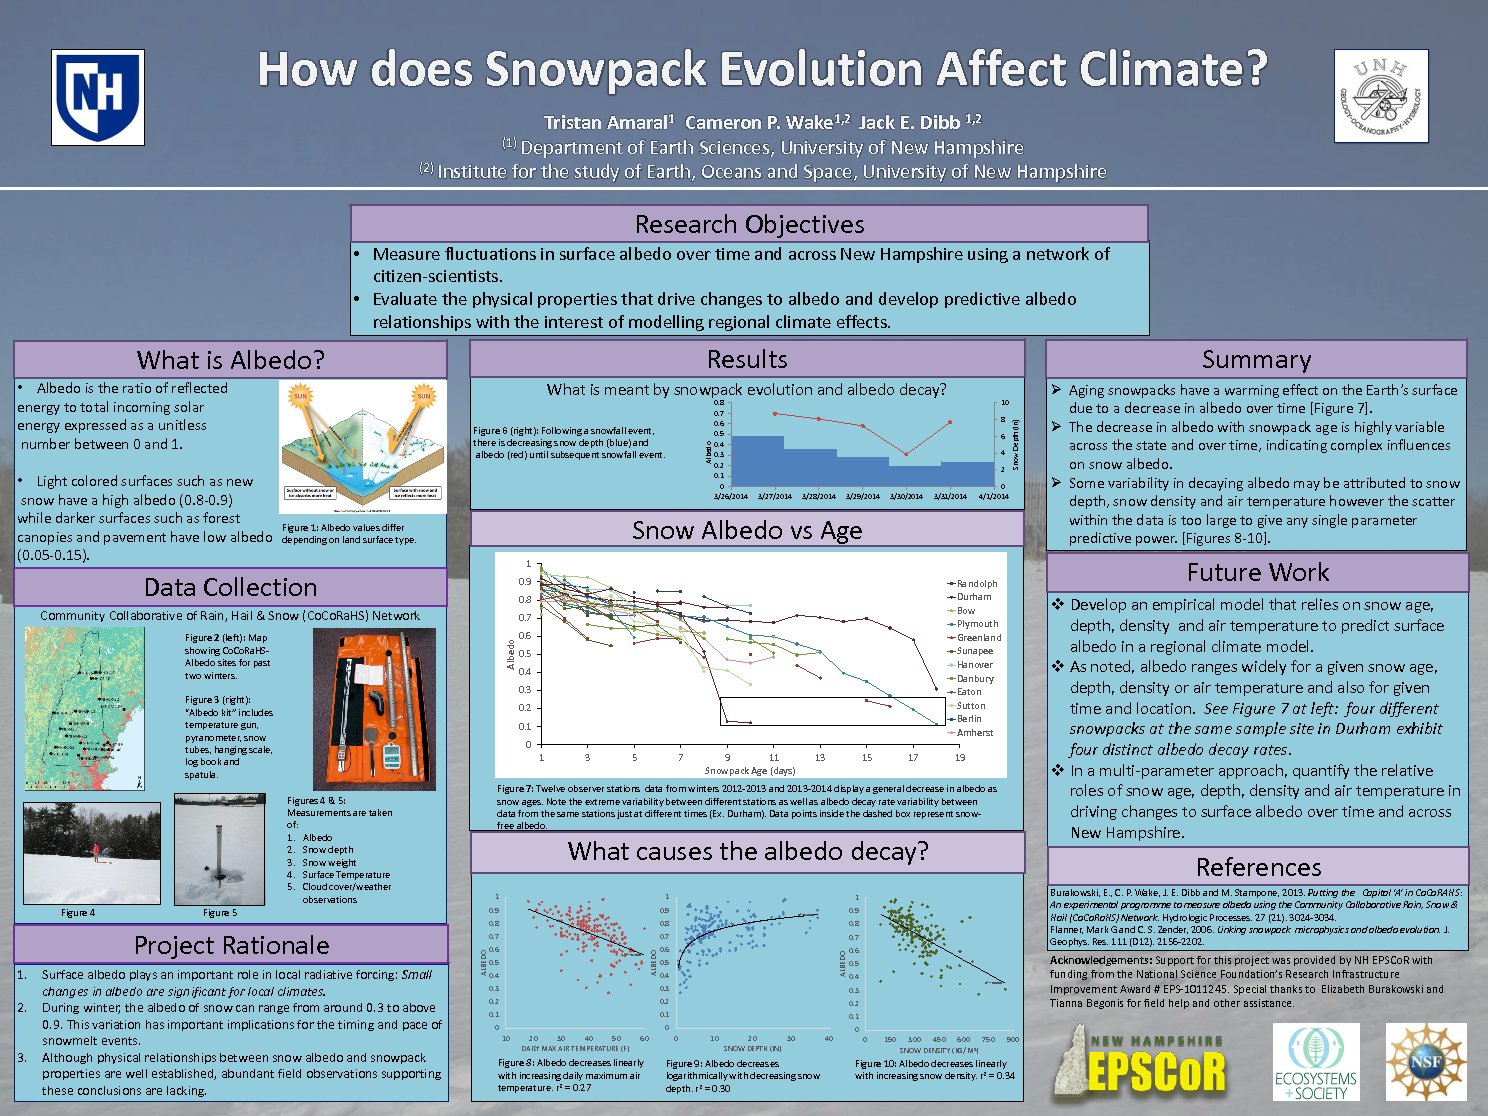 How Does Snowpack Evolution Affect Climate? by tov4